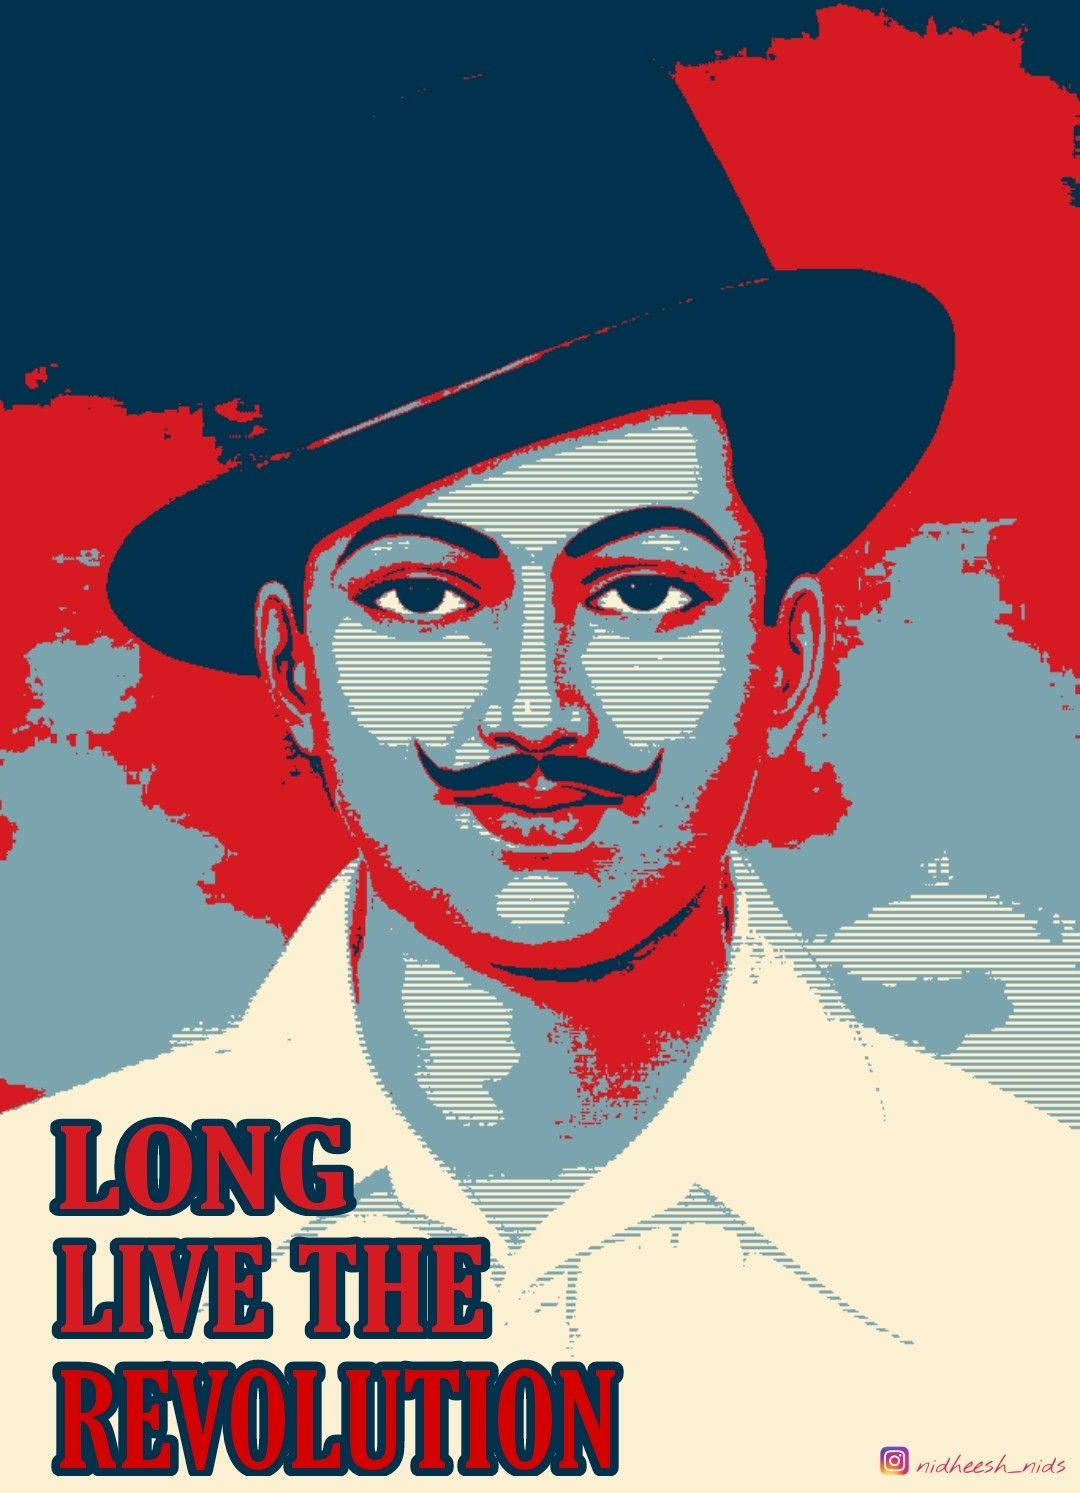 Download Shaheed Bhagat Singh Long Live The Evolution Wallpaper | Wallpapers .com